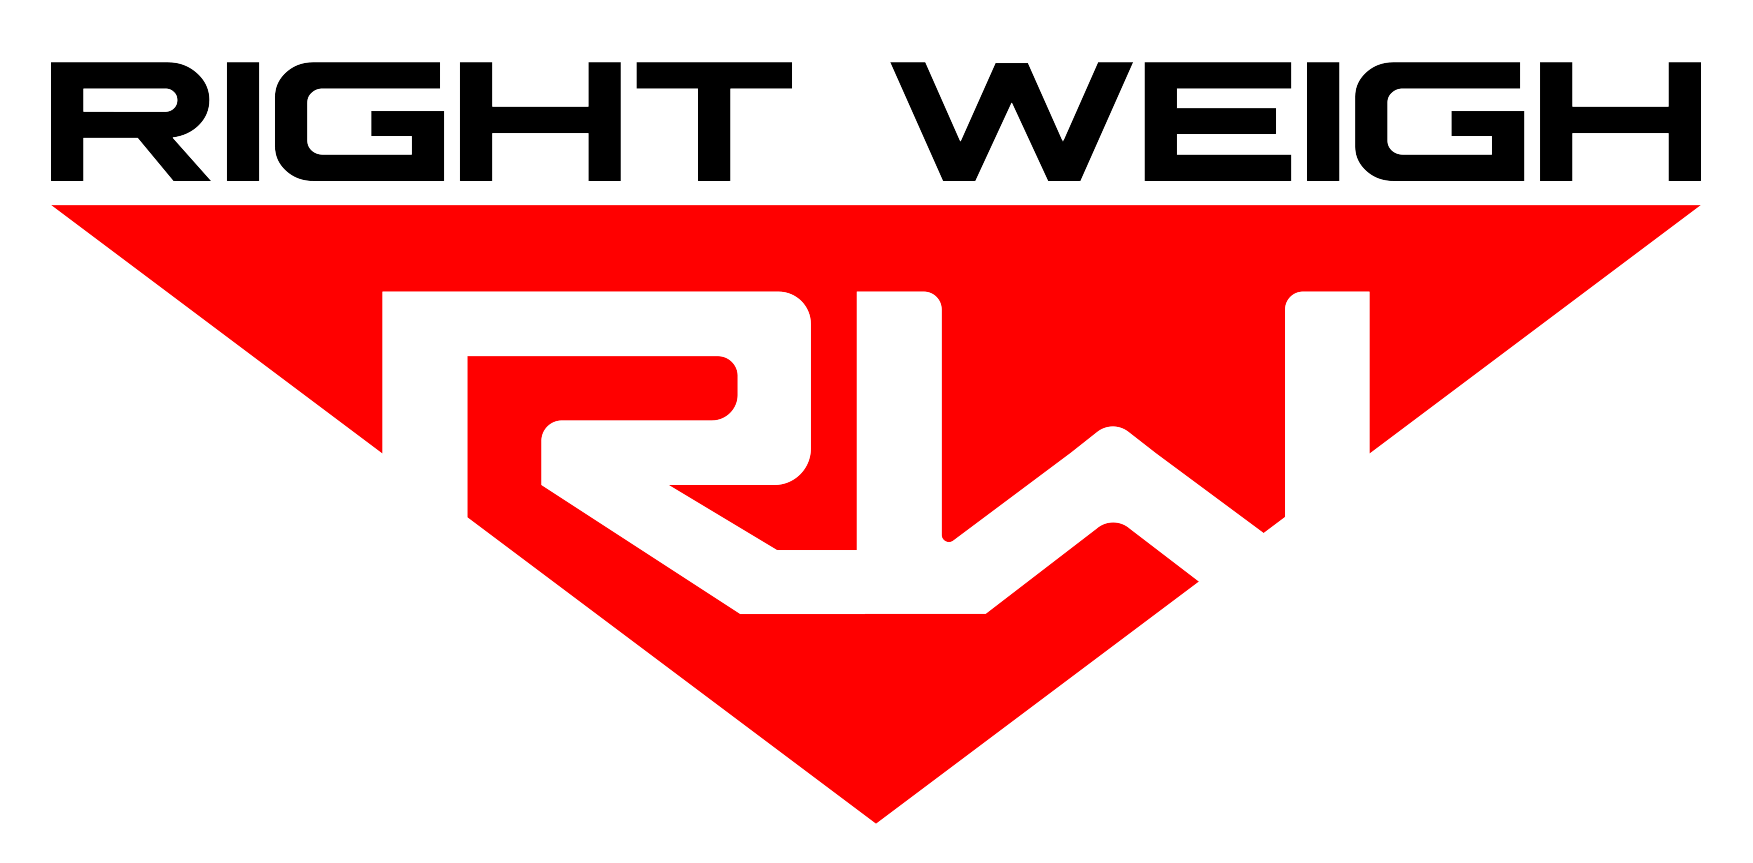 Right Weigh logo